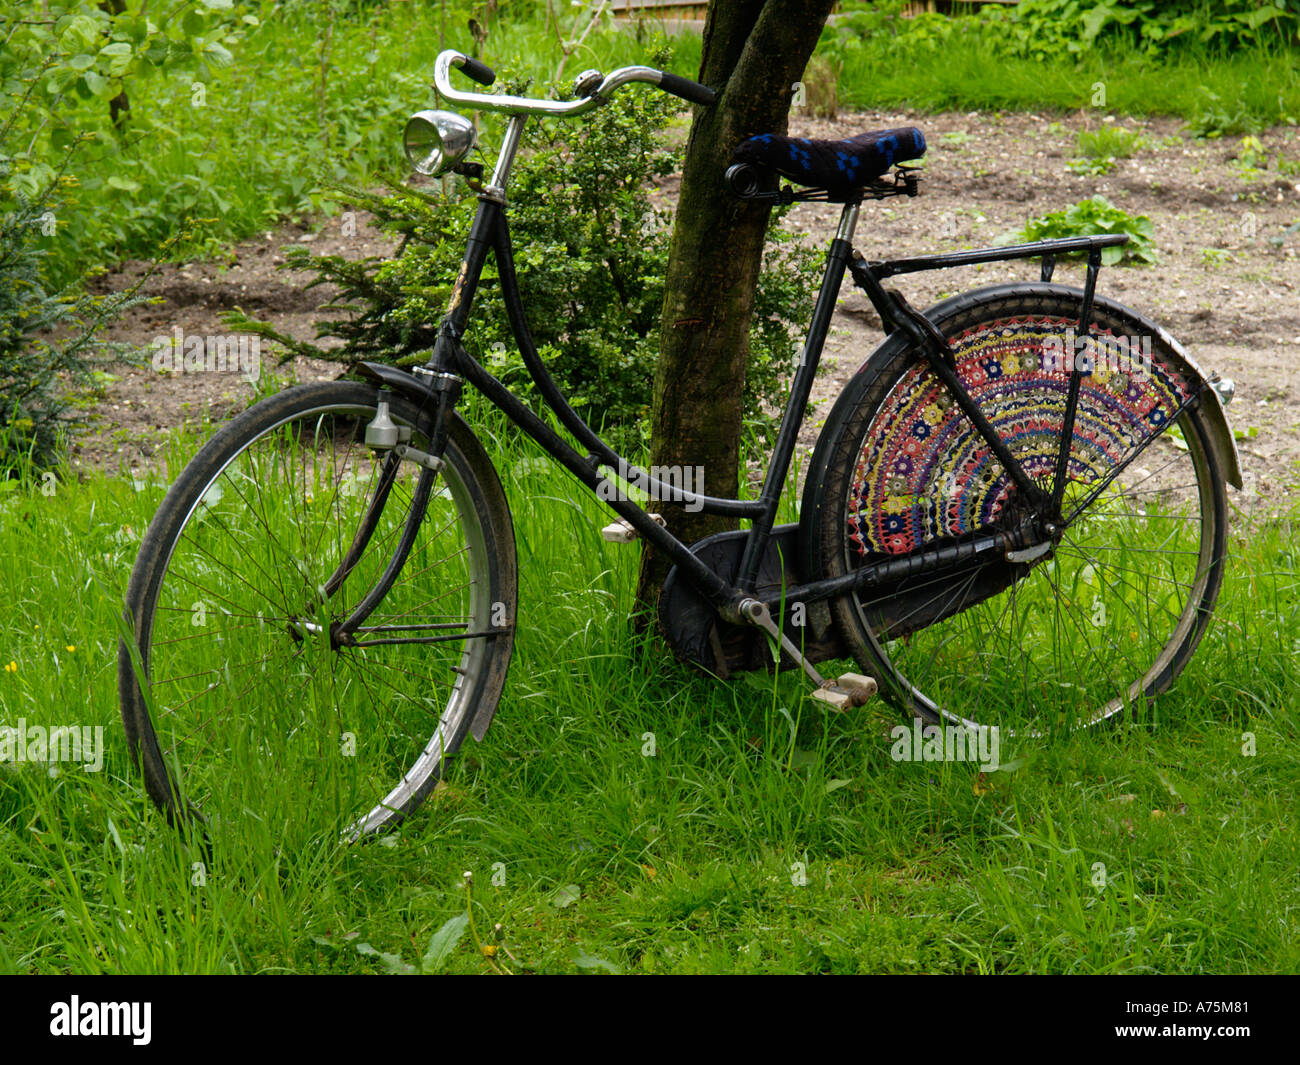 Dutch so called grandma s bicycle or omafiets with original crocheted coat  protectors and seat cover the Netherlands Stock Photo - Alamy